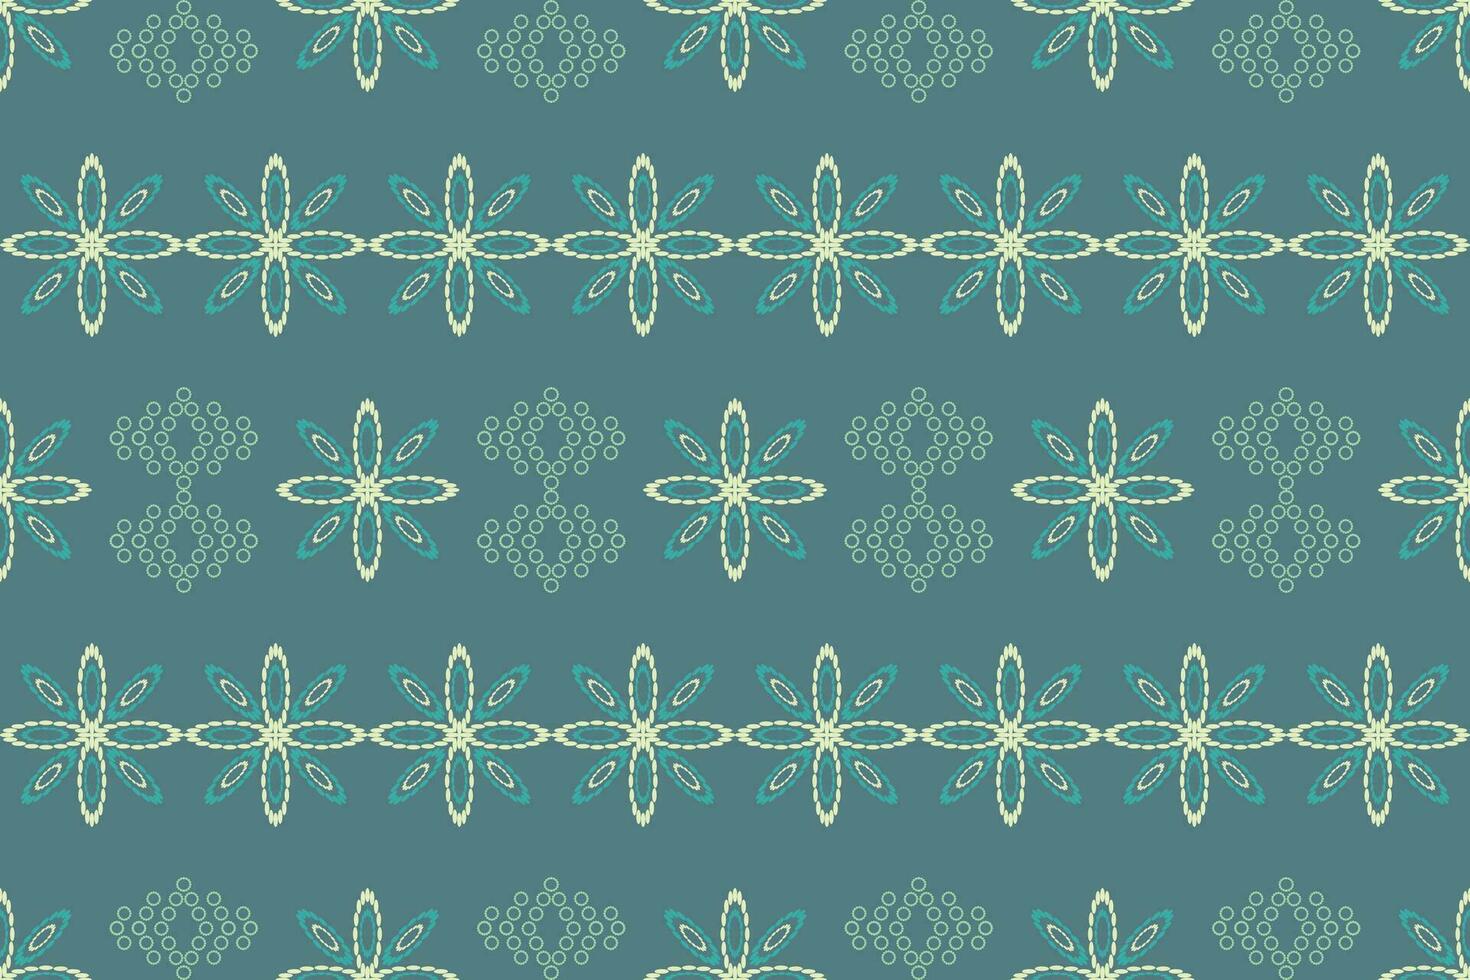 Seamless striped pattern in aztec style.Tribal embroidery,Gypsy,folk pattern.Ethnic abstract ikat.Spring summer autumn decor.Native aztec boho vector design.